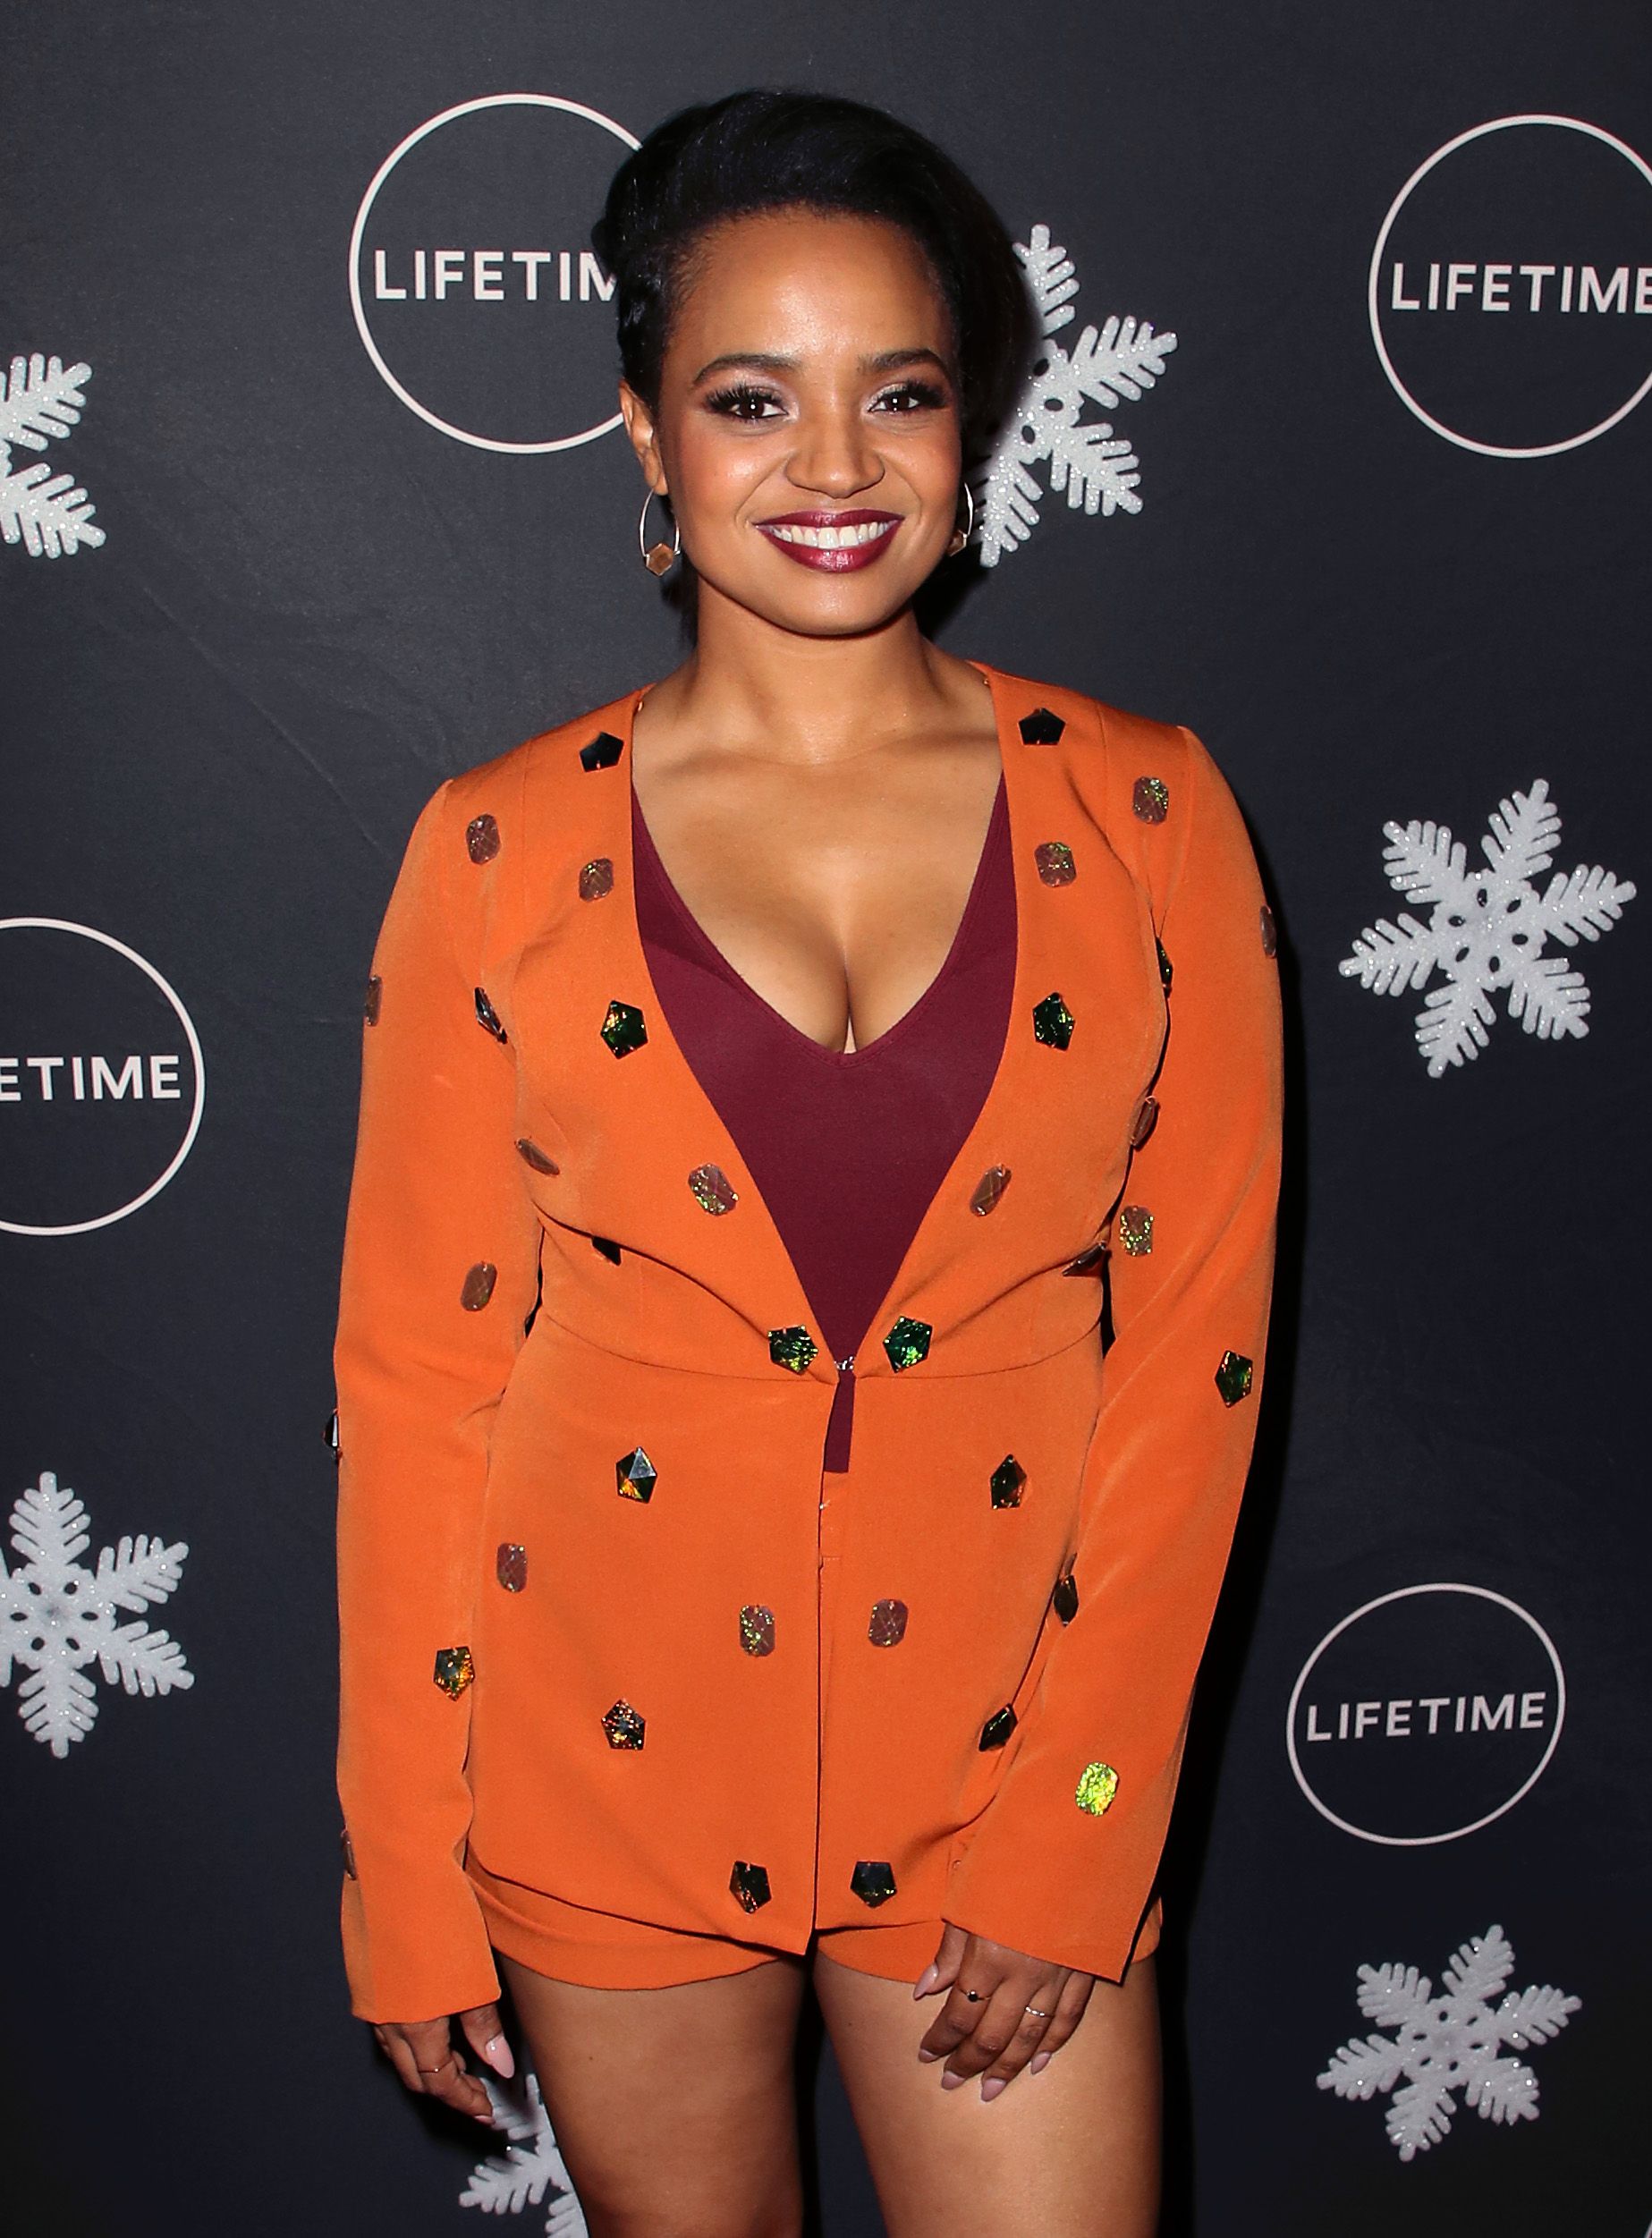 Actress Kyla Pratt attends the 2019 "It's a Wonderful Lifetime" holiday party at Los Angeles, California on October 22, 2019 | Source: Getty Images